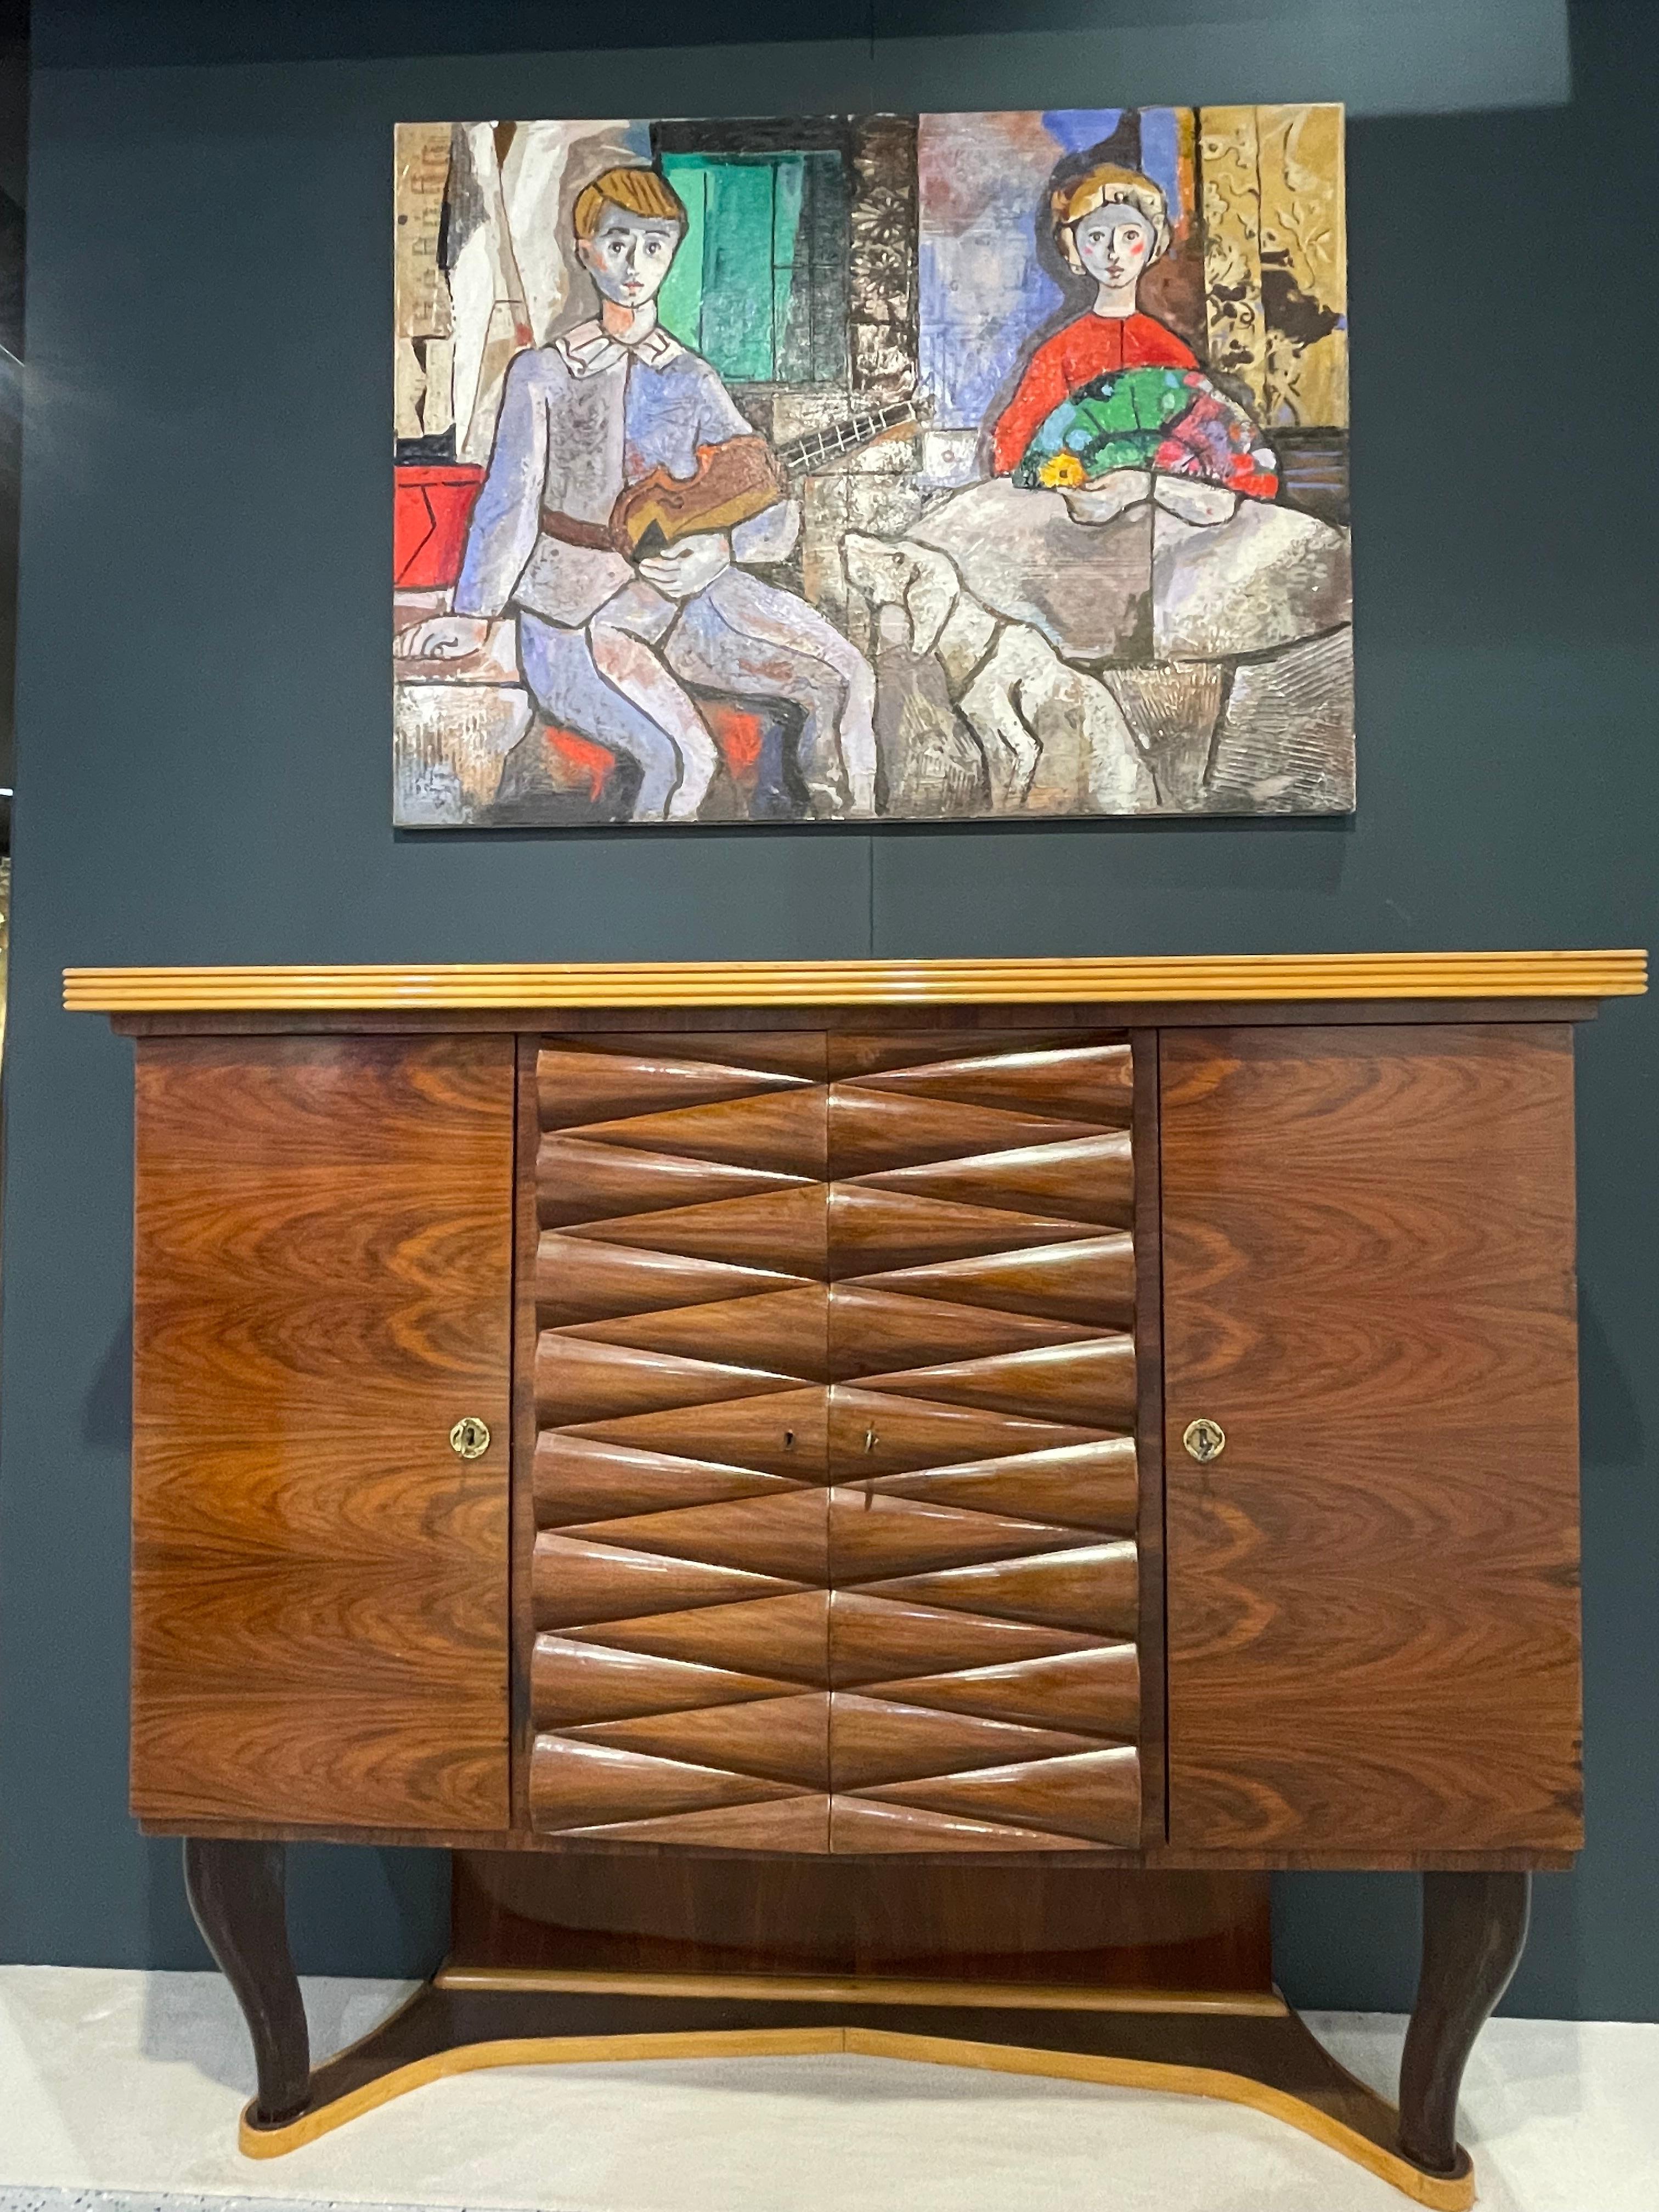 Large Italian mahogany Art Deco bar cabinet designed by Michele Merighi and made by Ronconi Cantù.
This cabinet is part of the dining room published on Fontana Arte (the Arting Company) page 248.
Excellent quality in perfect vintage condition.